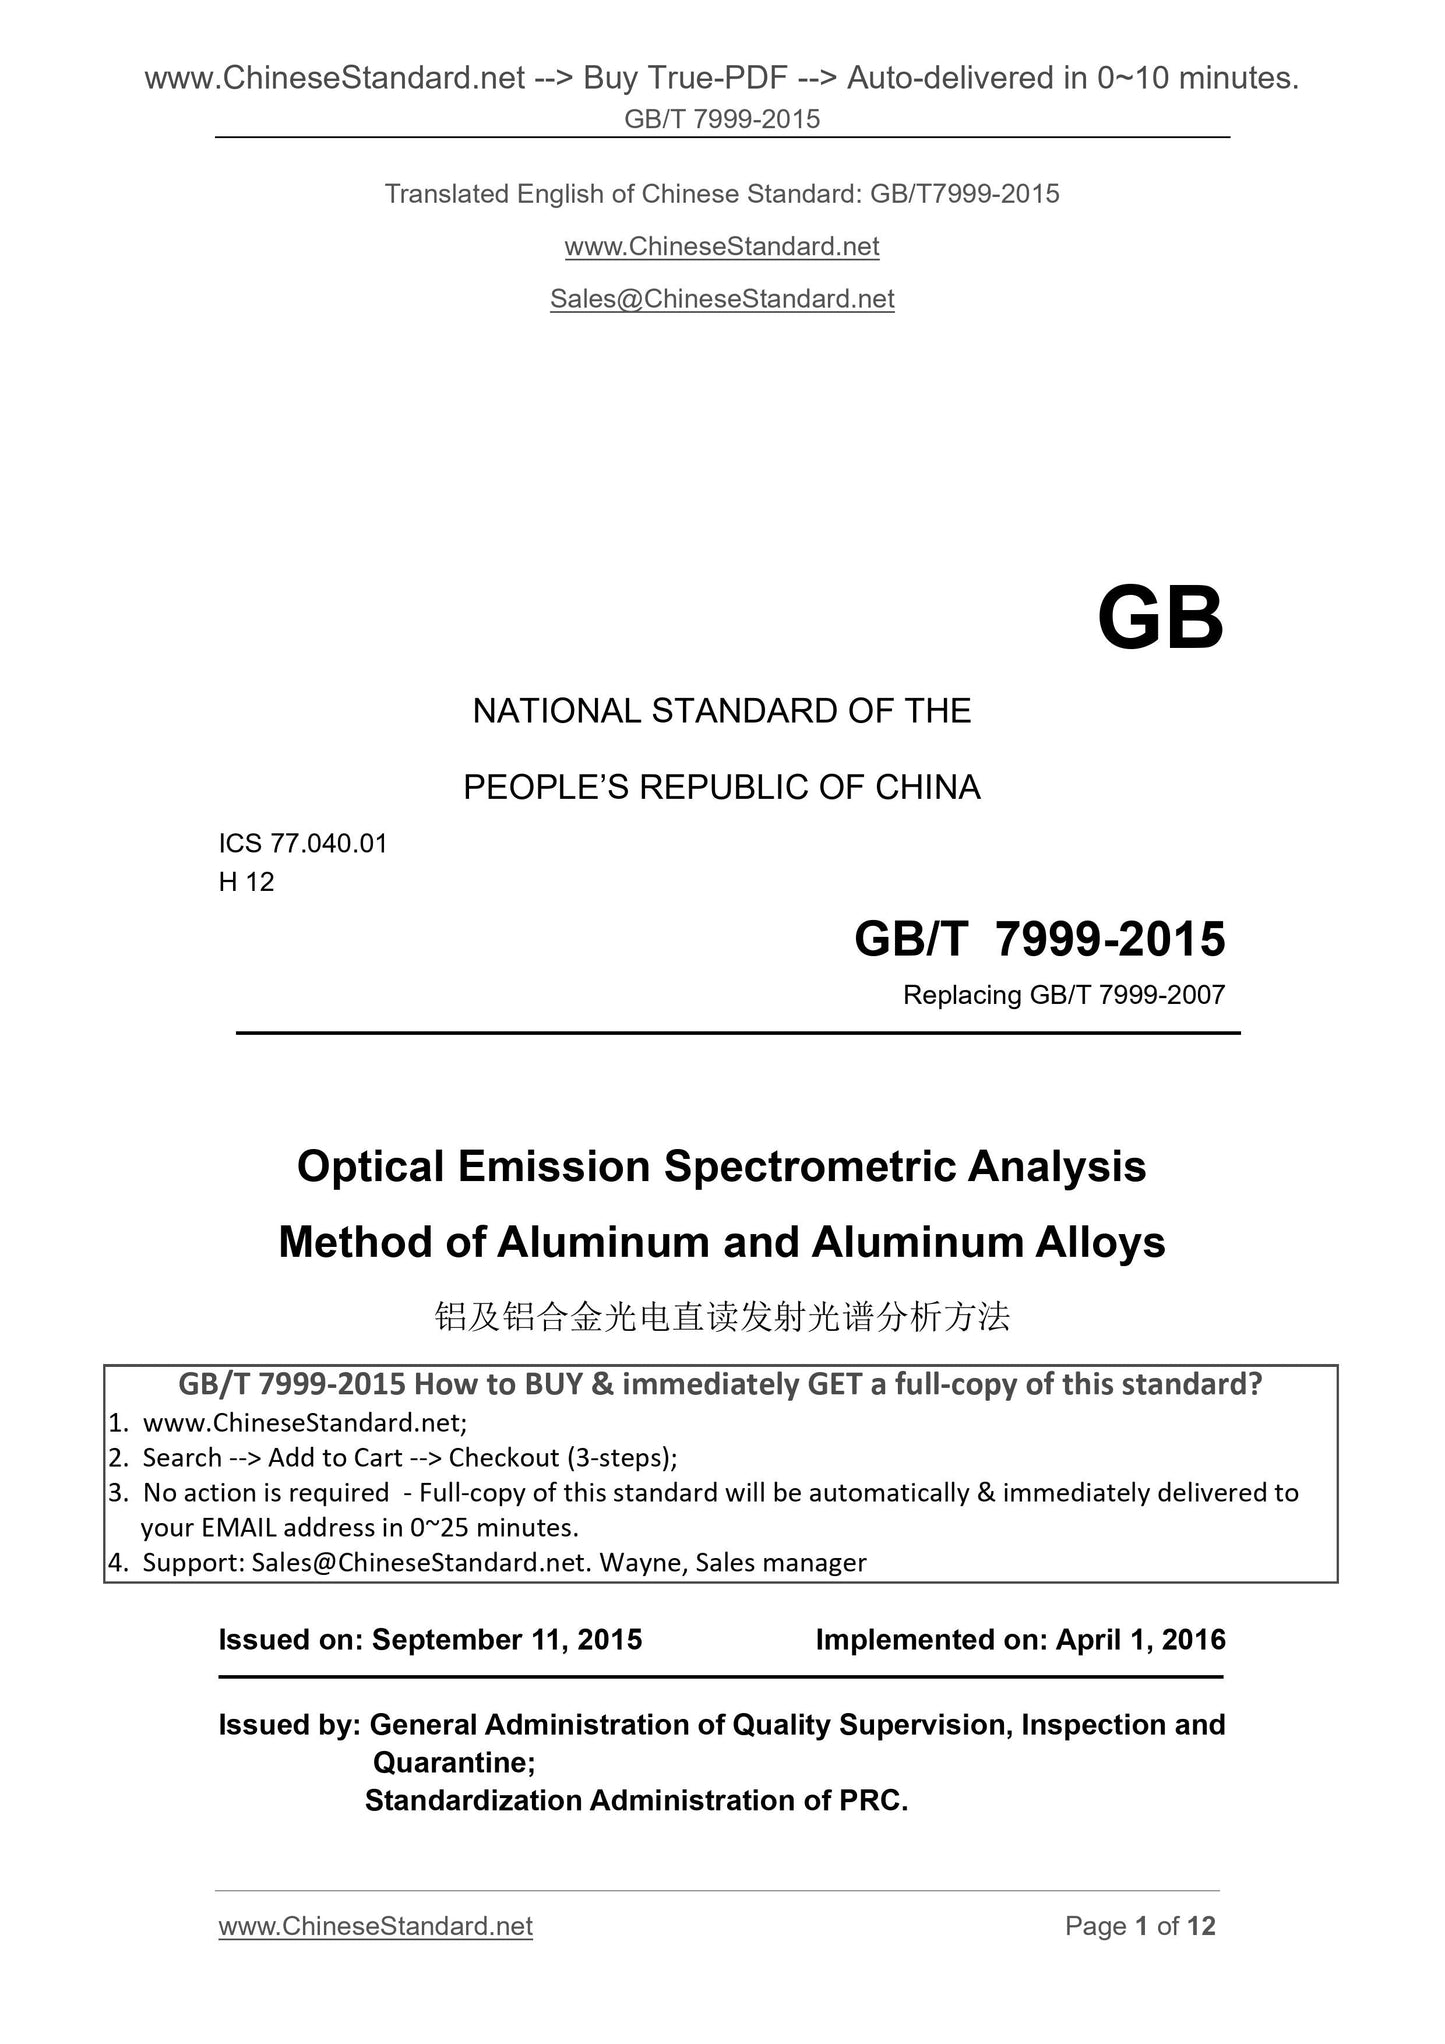 GB/T 7999-2015 Page 1